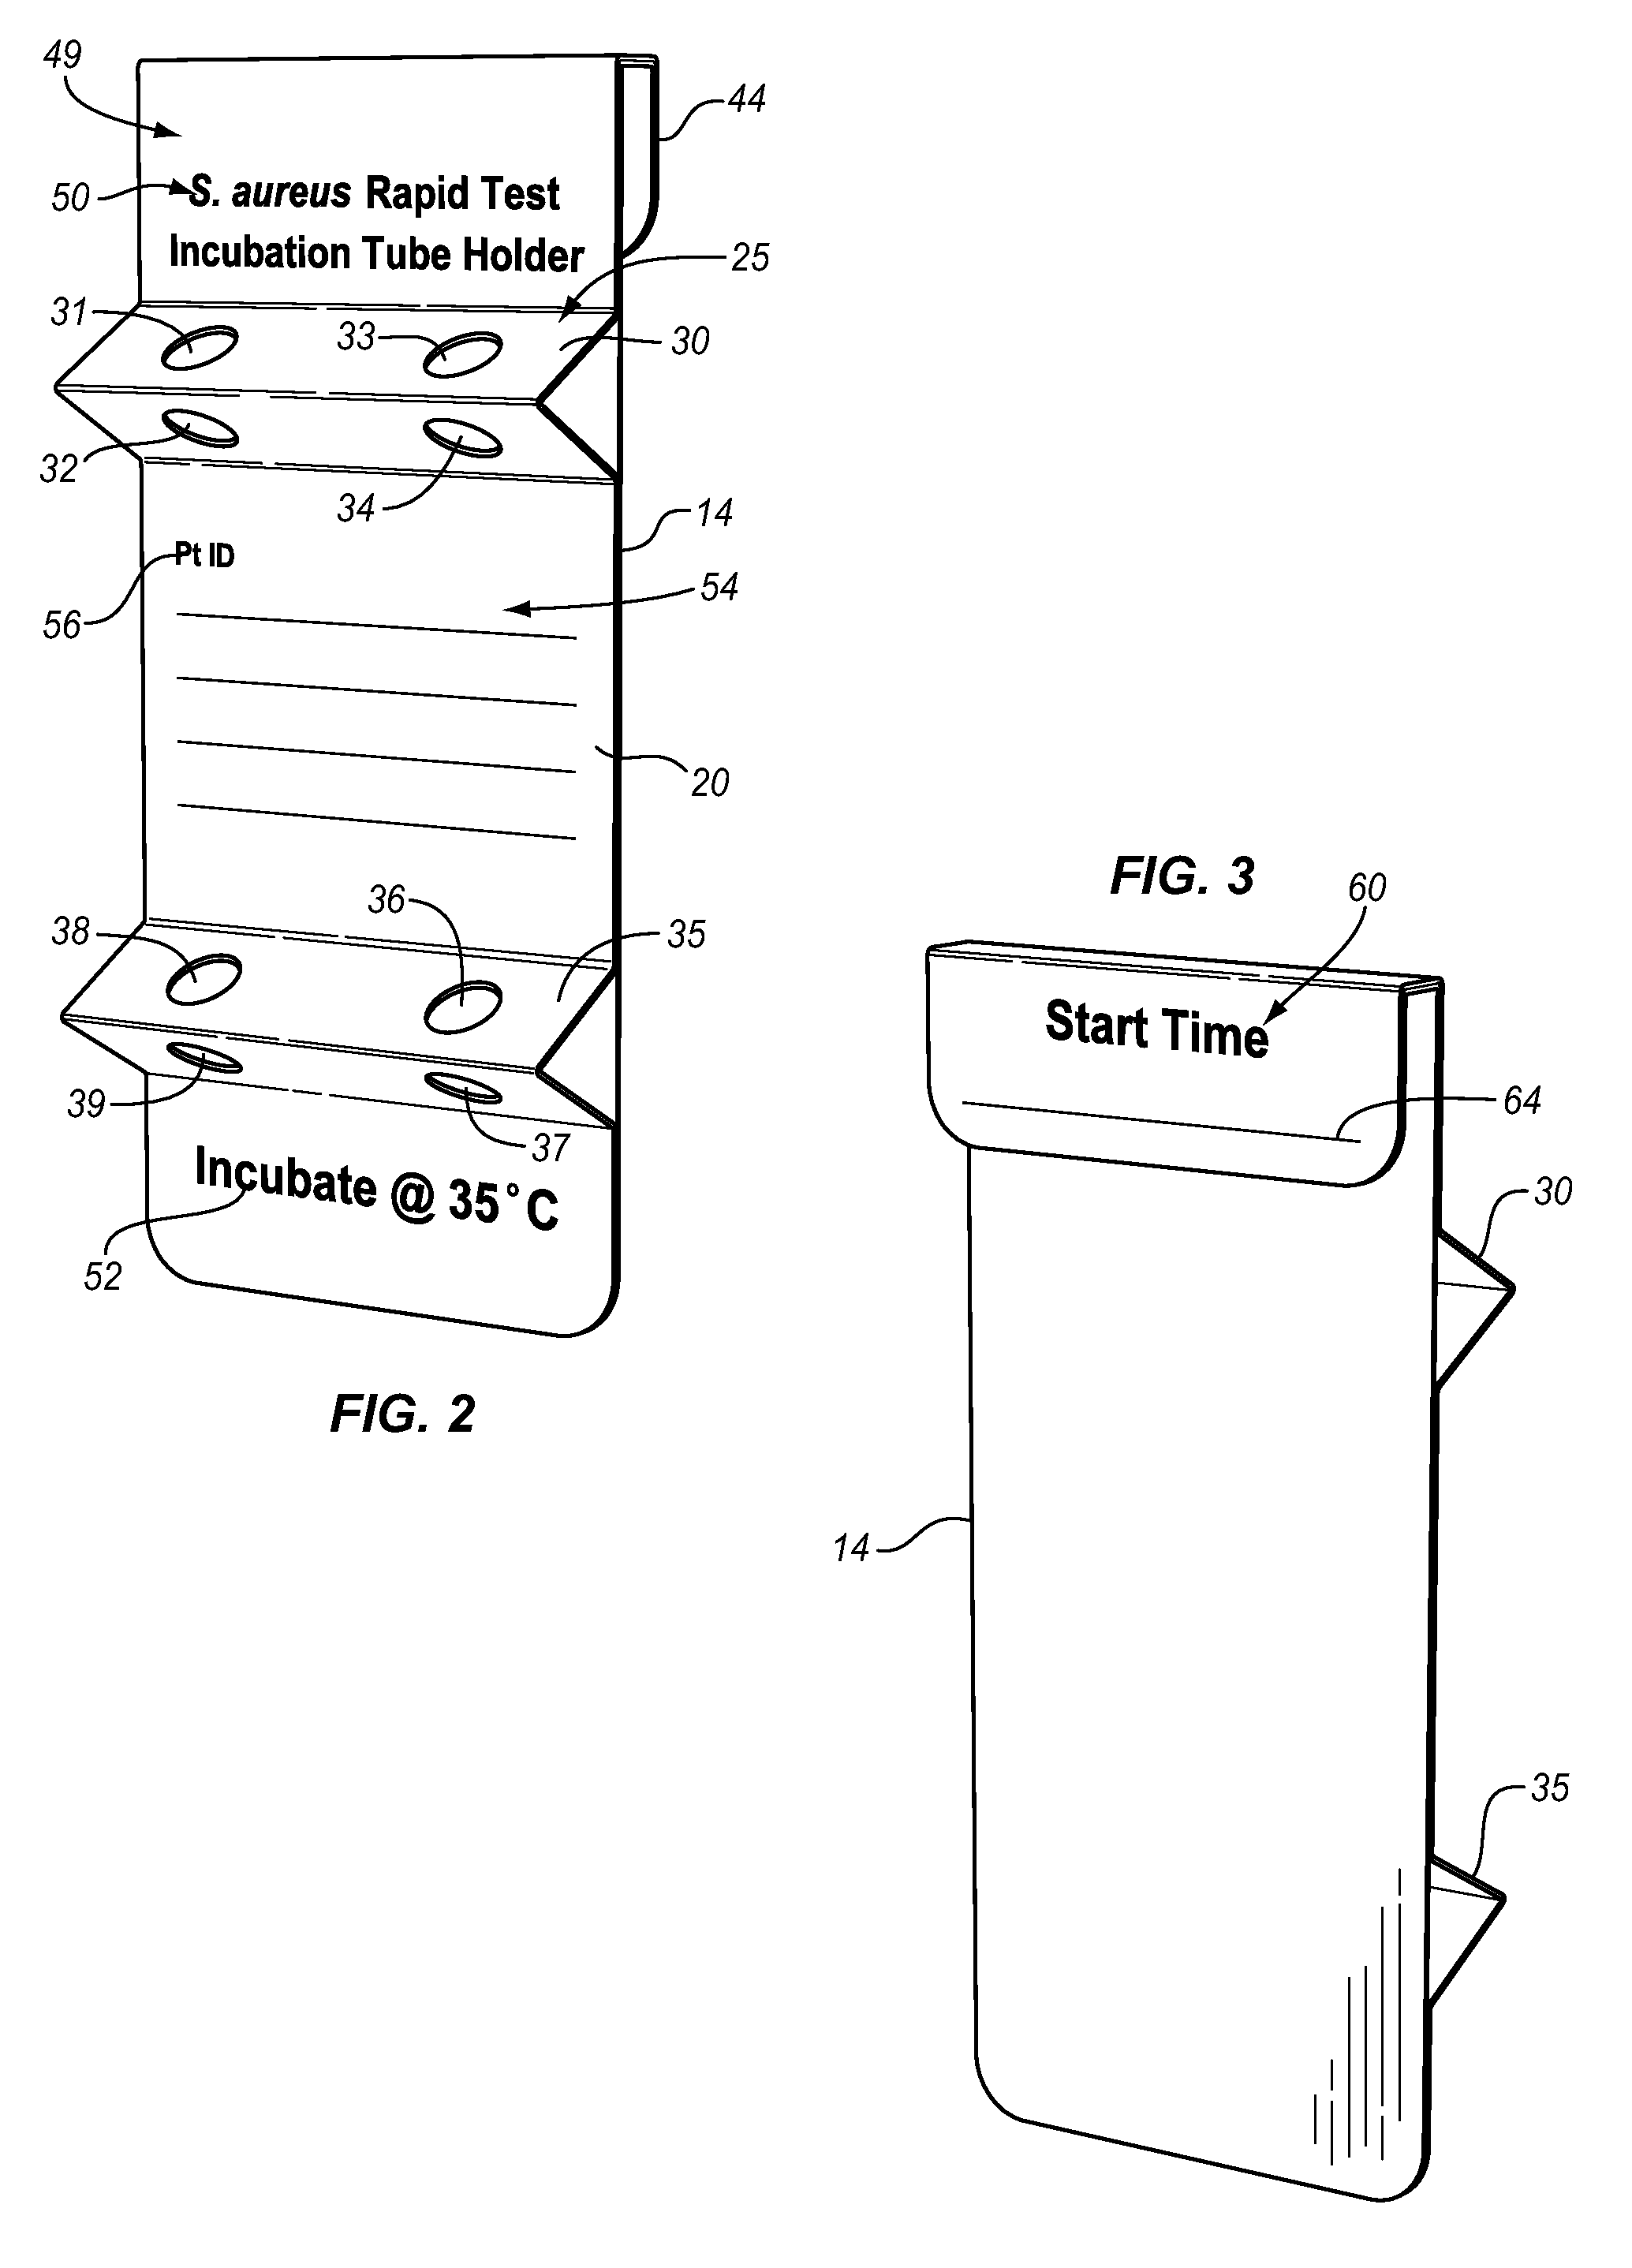 Method and apparatus for bacteriophage-based diagnostic assays